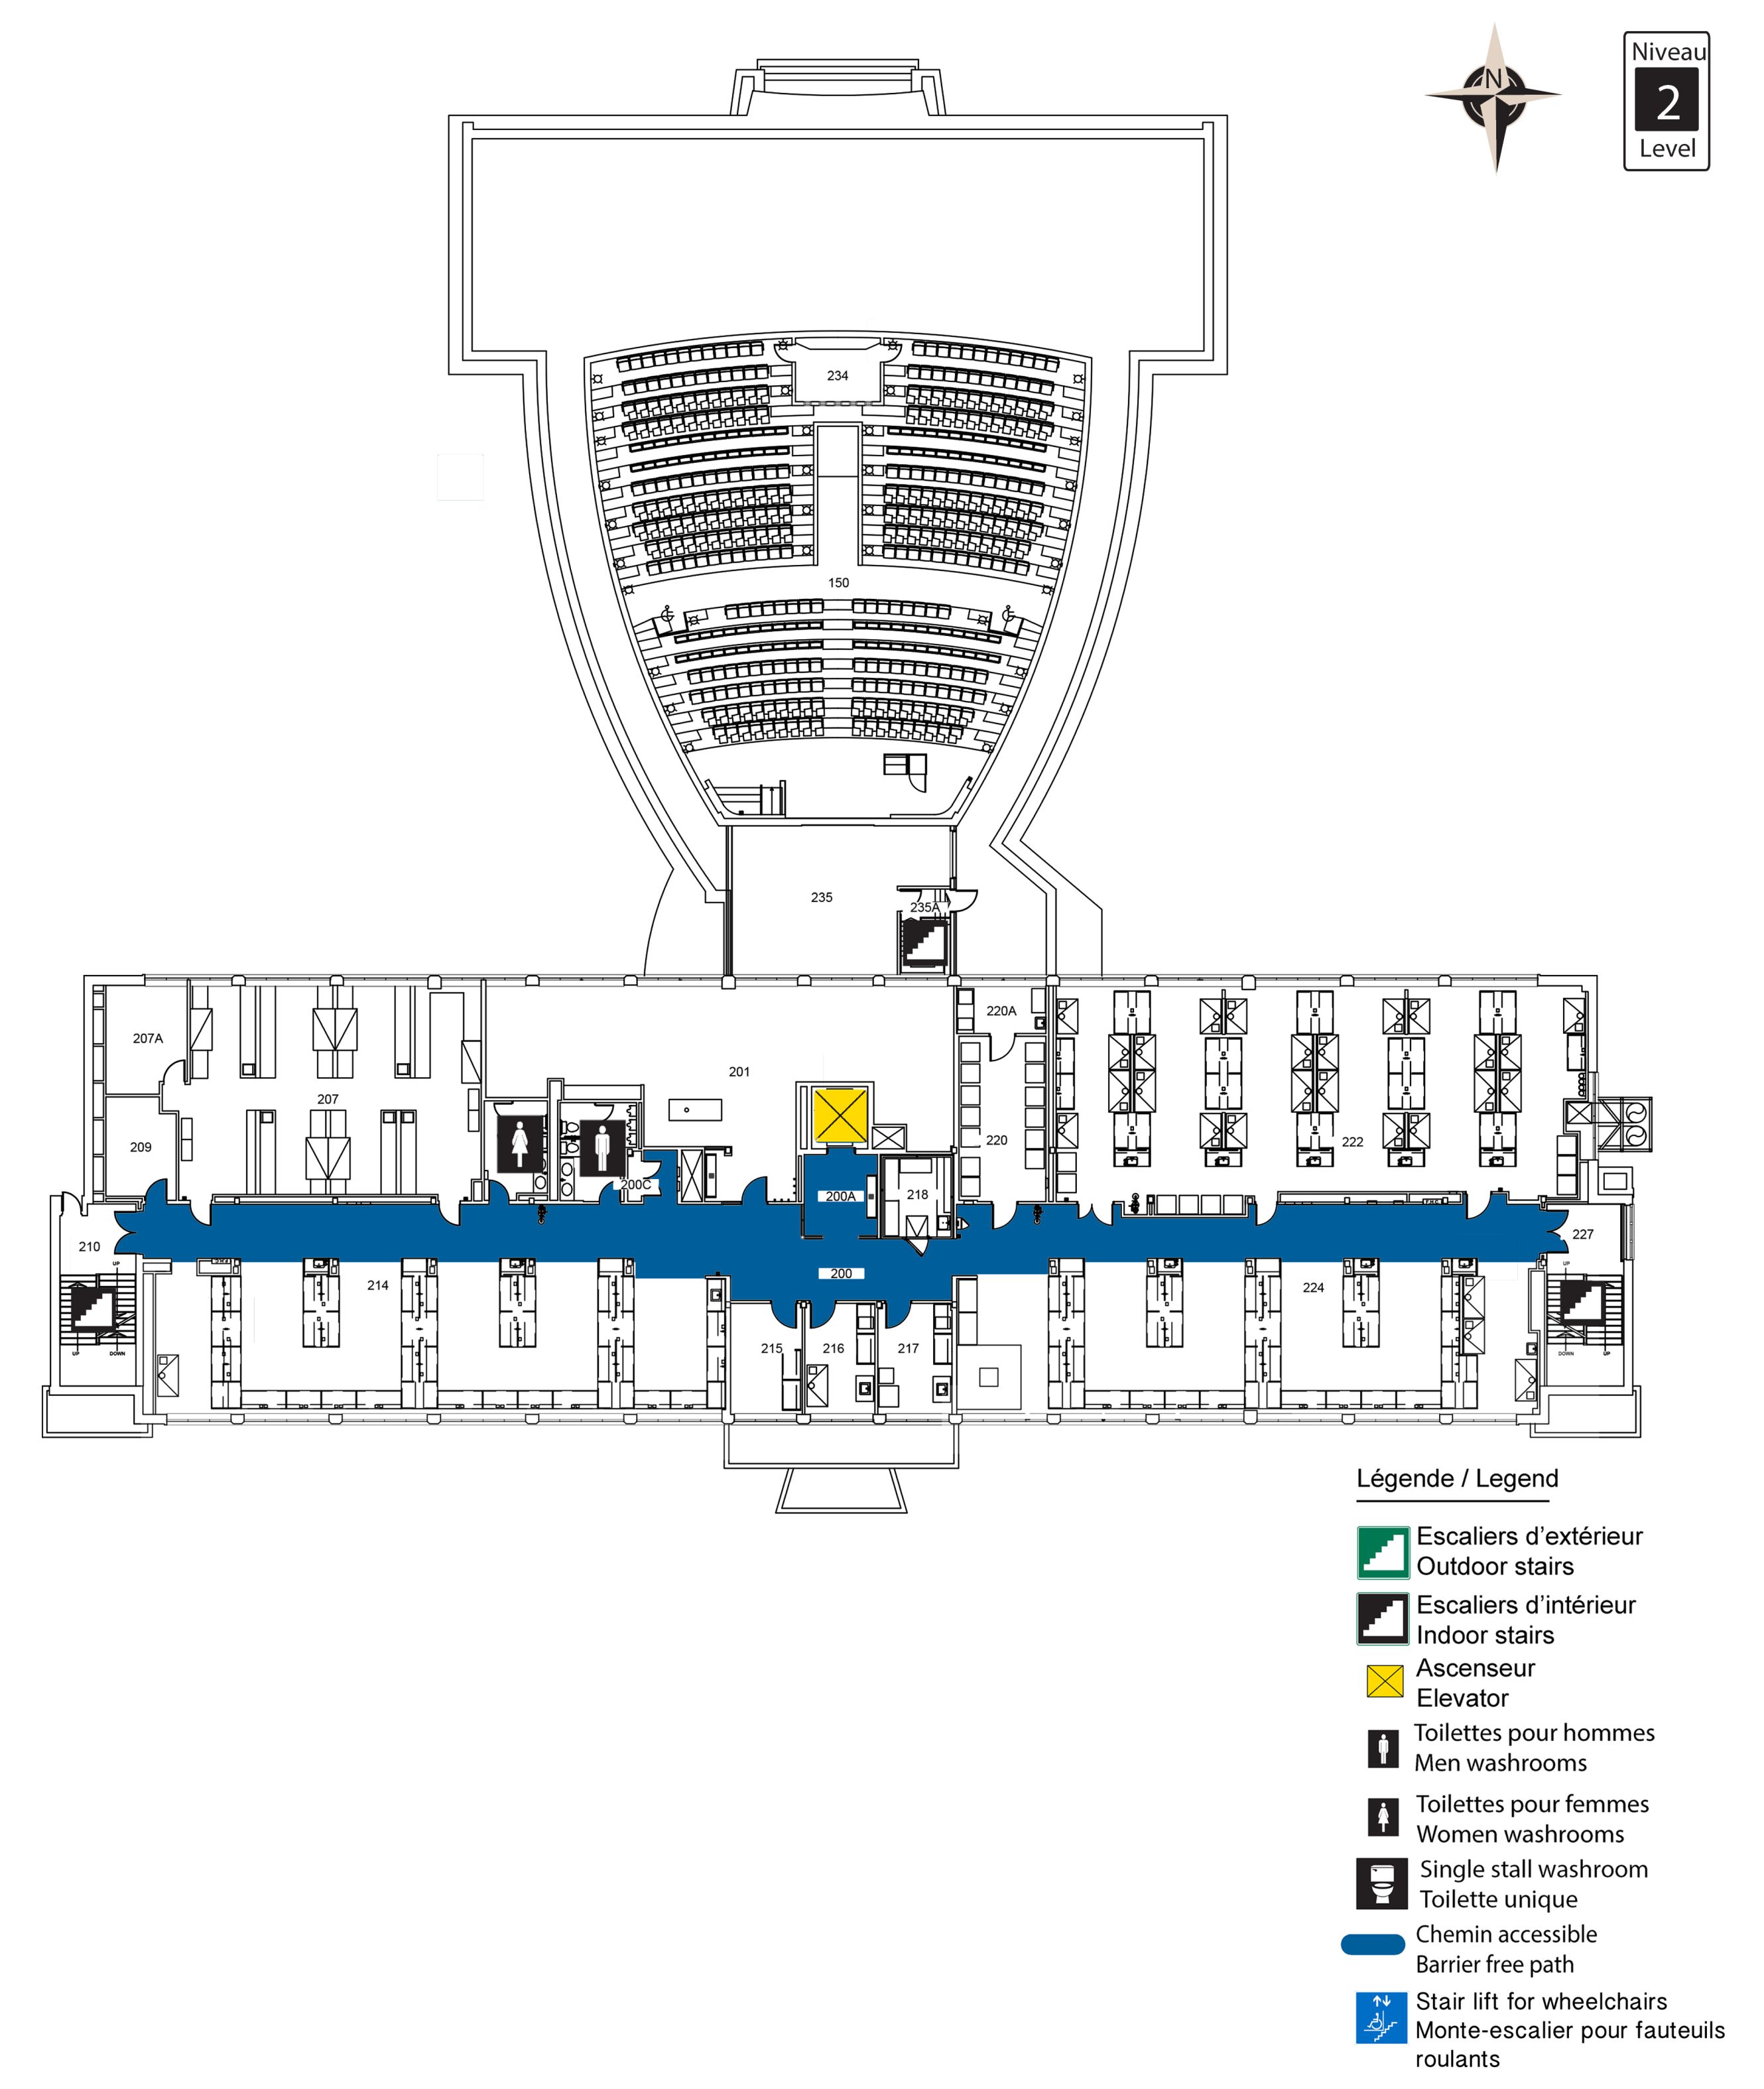 Accessible map - MRN level 2